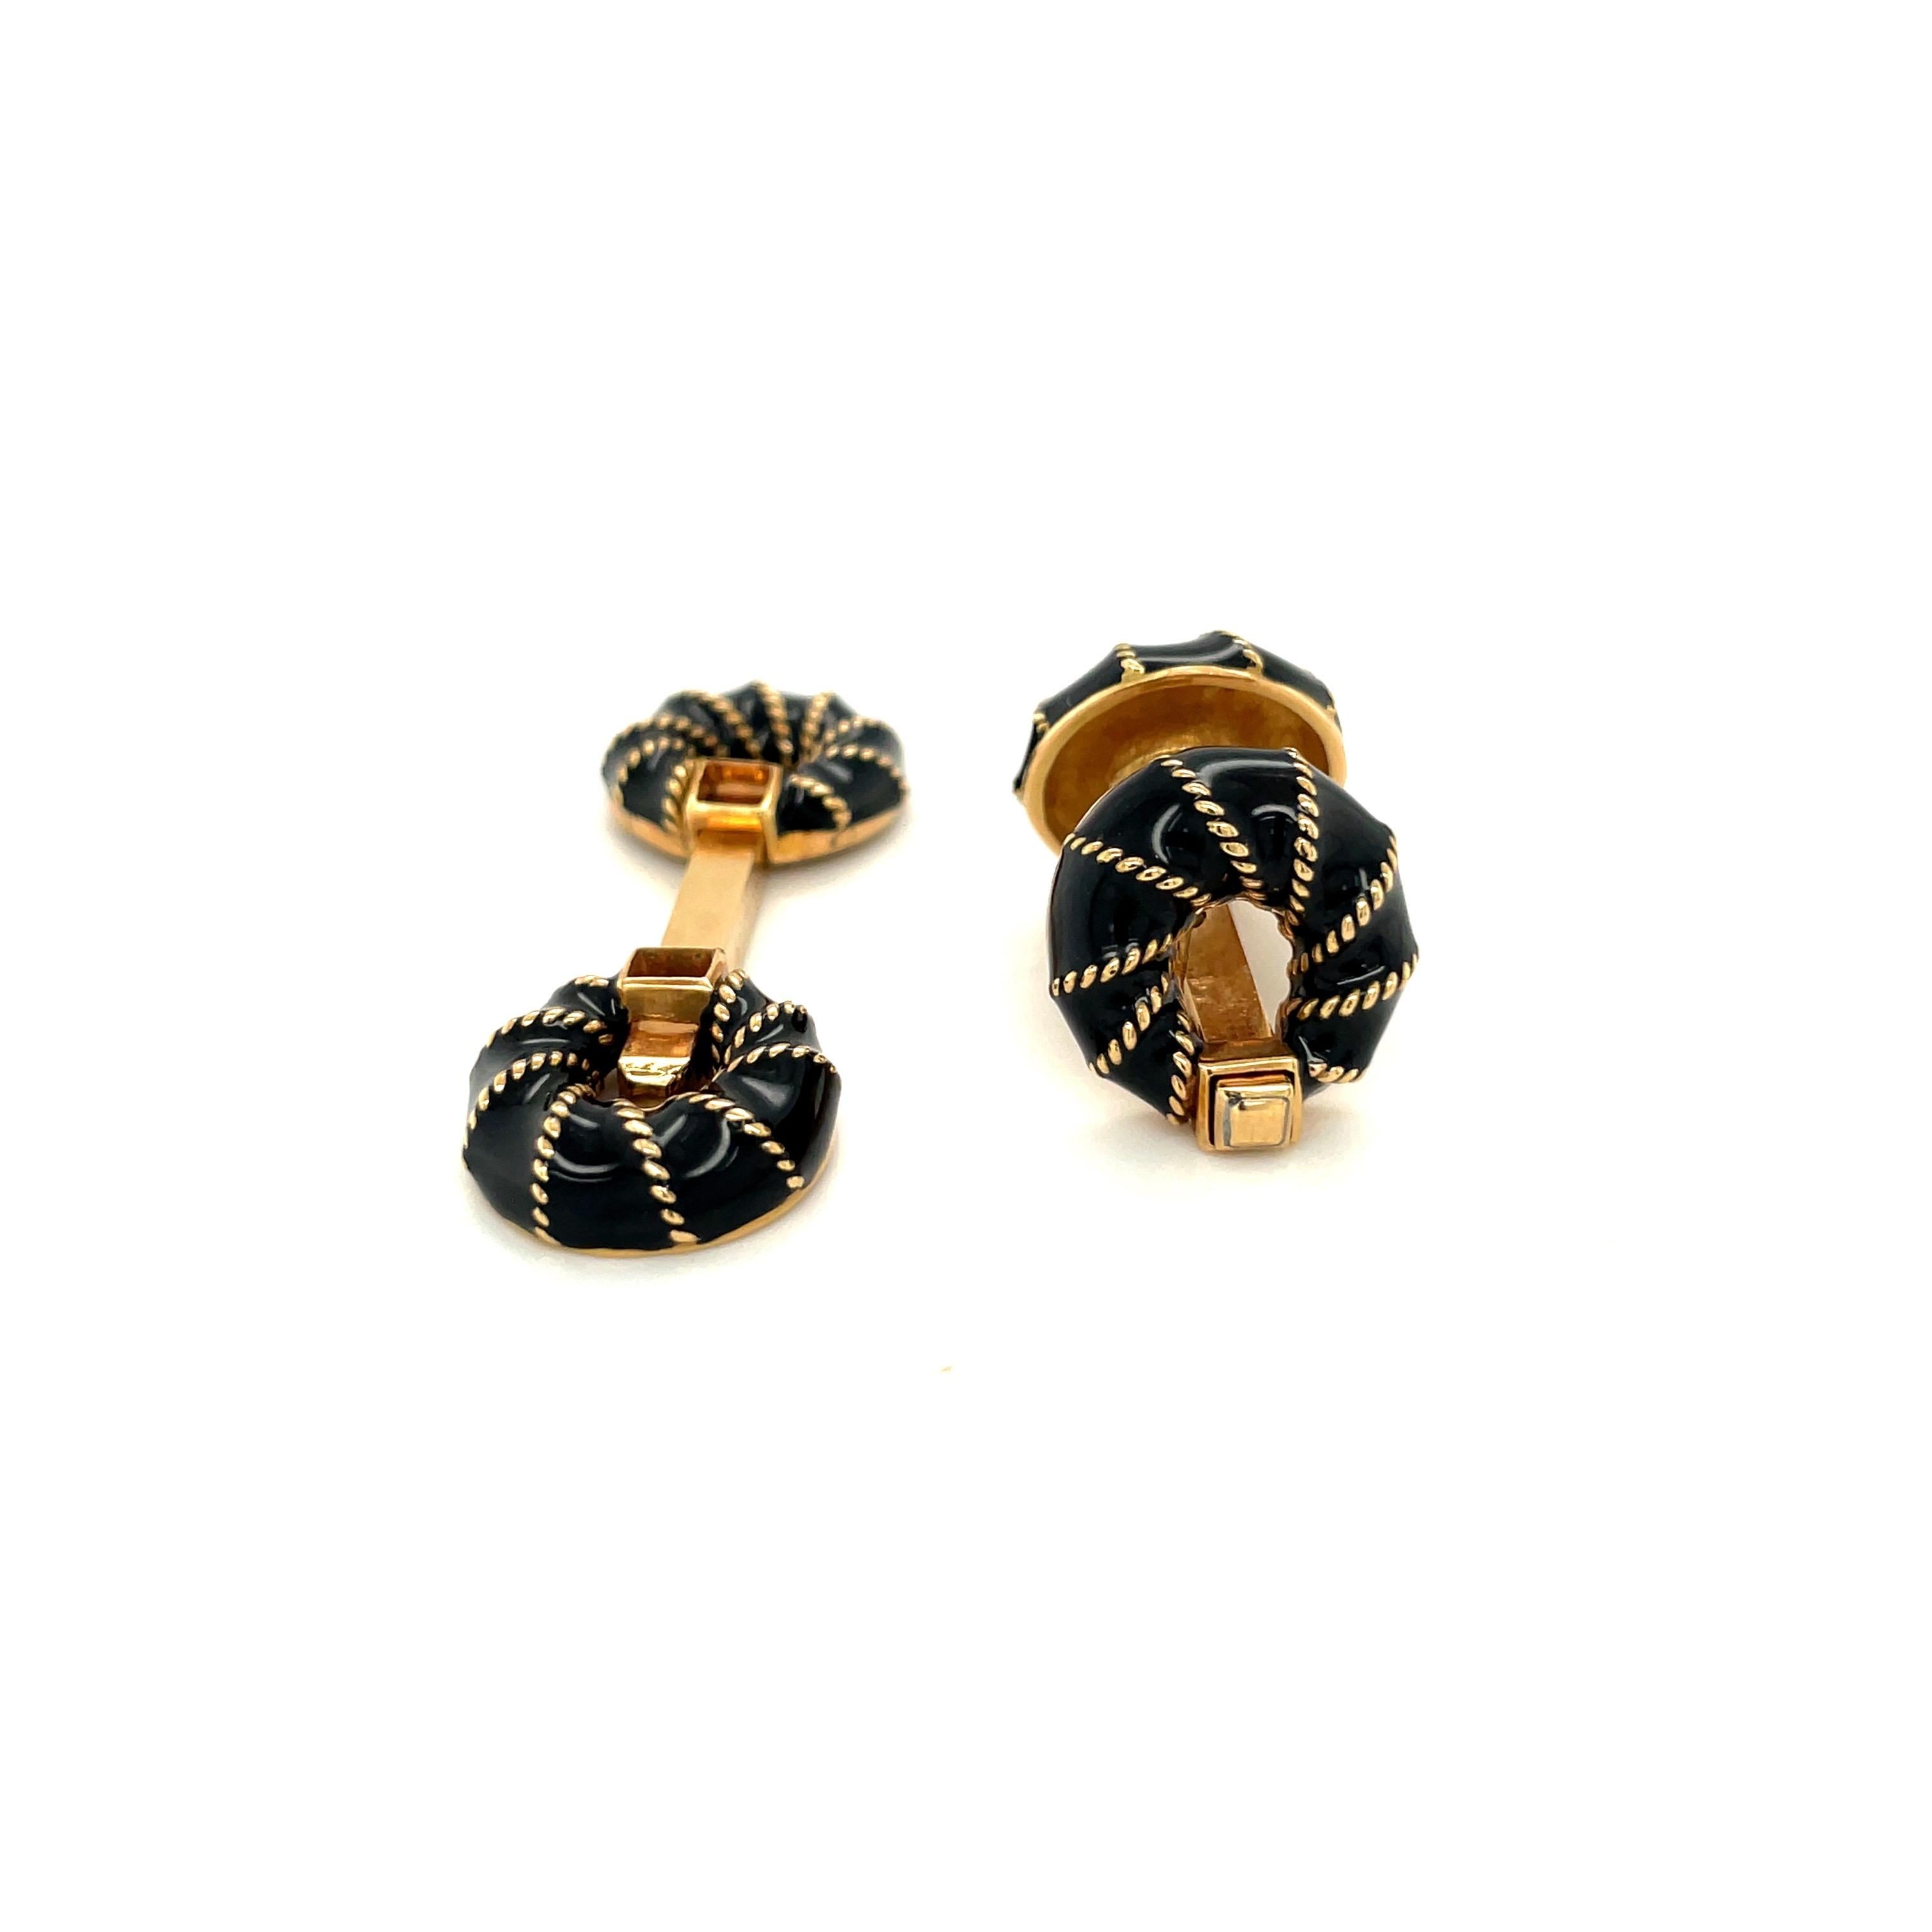 Classic 18 karat yellow gold cuff links. The bar style cuff links are designed with round donut shaped black onyx end pieces. The onyx is wrapped in gold. The bar style works with a spring mechanism.